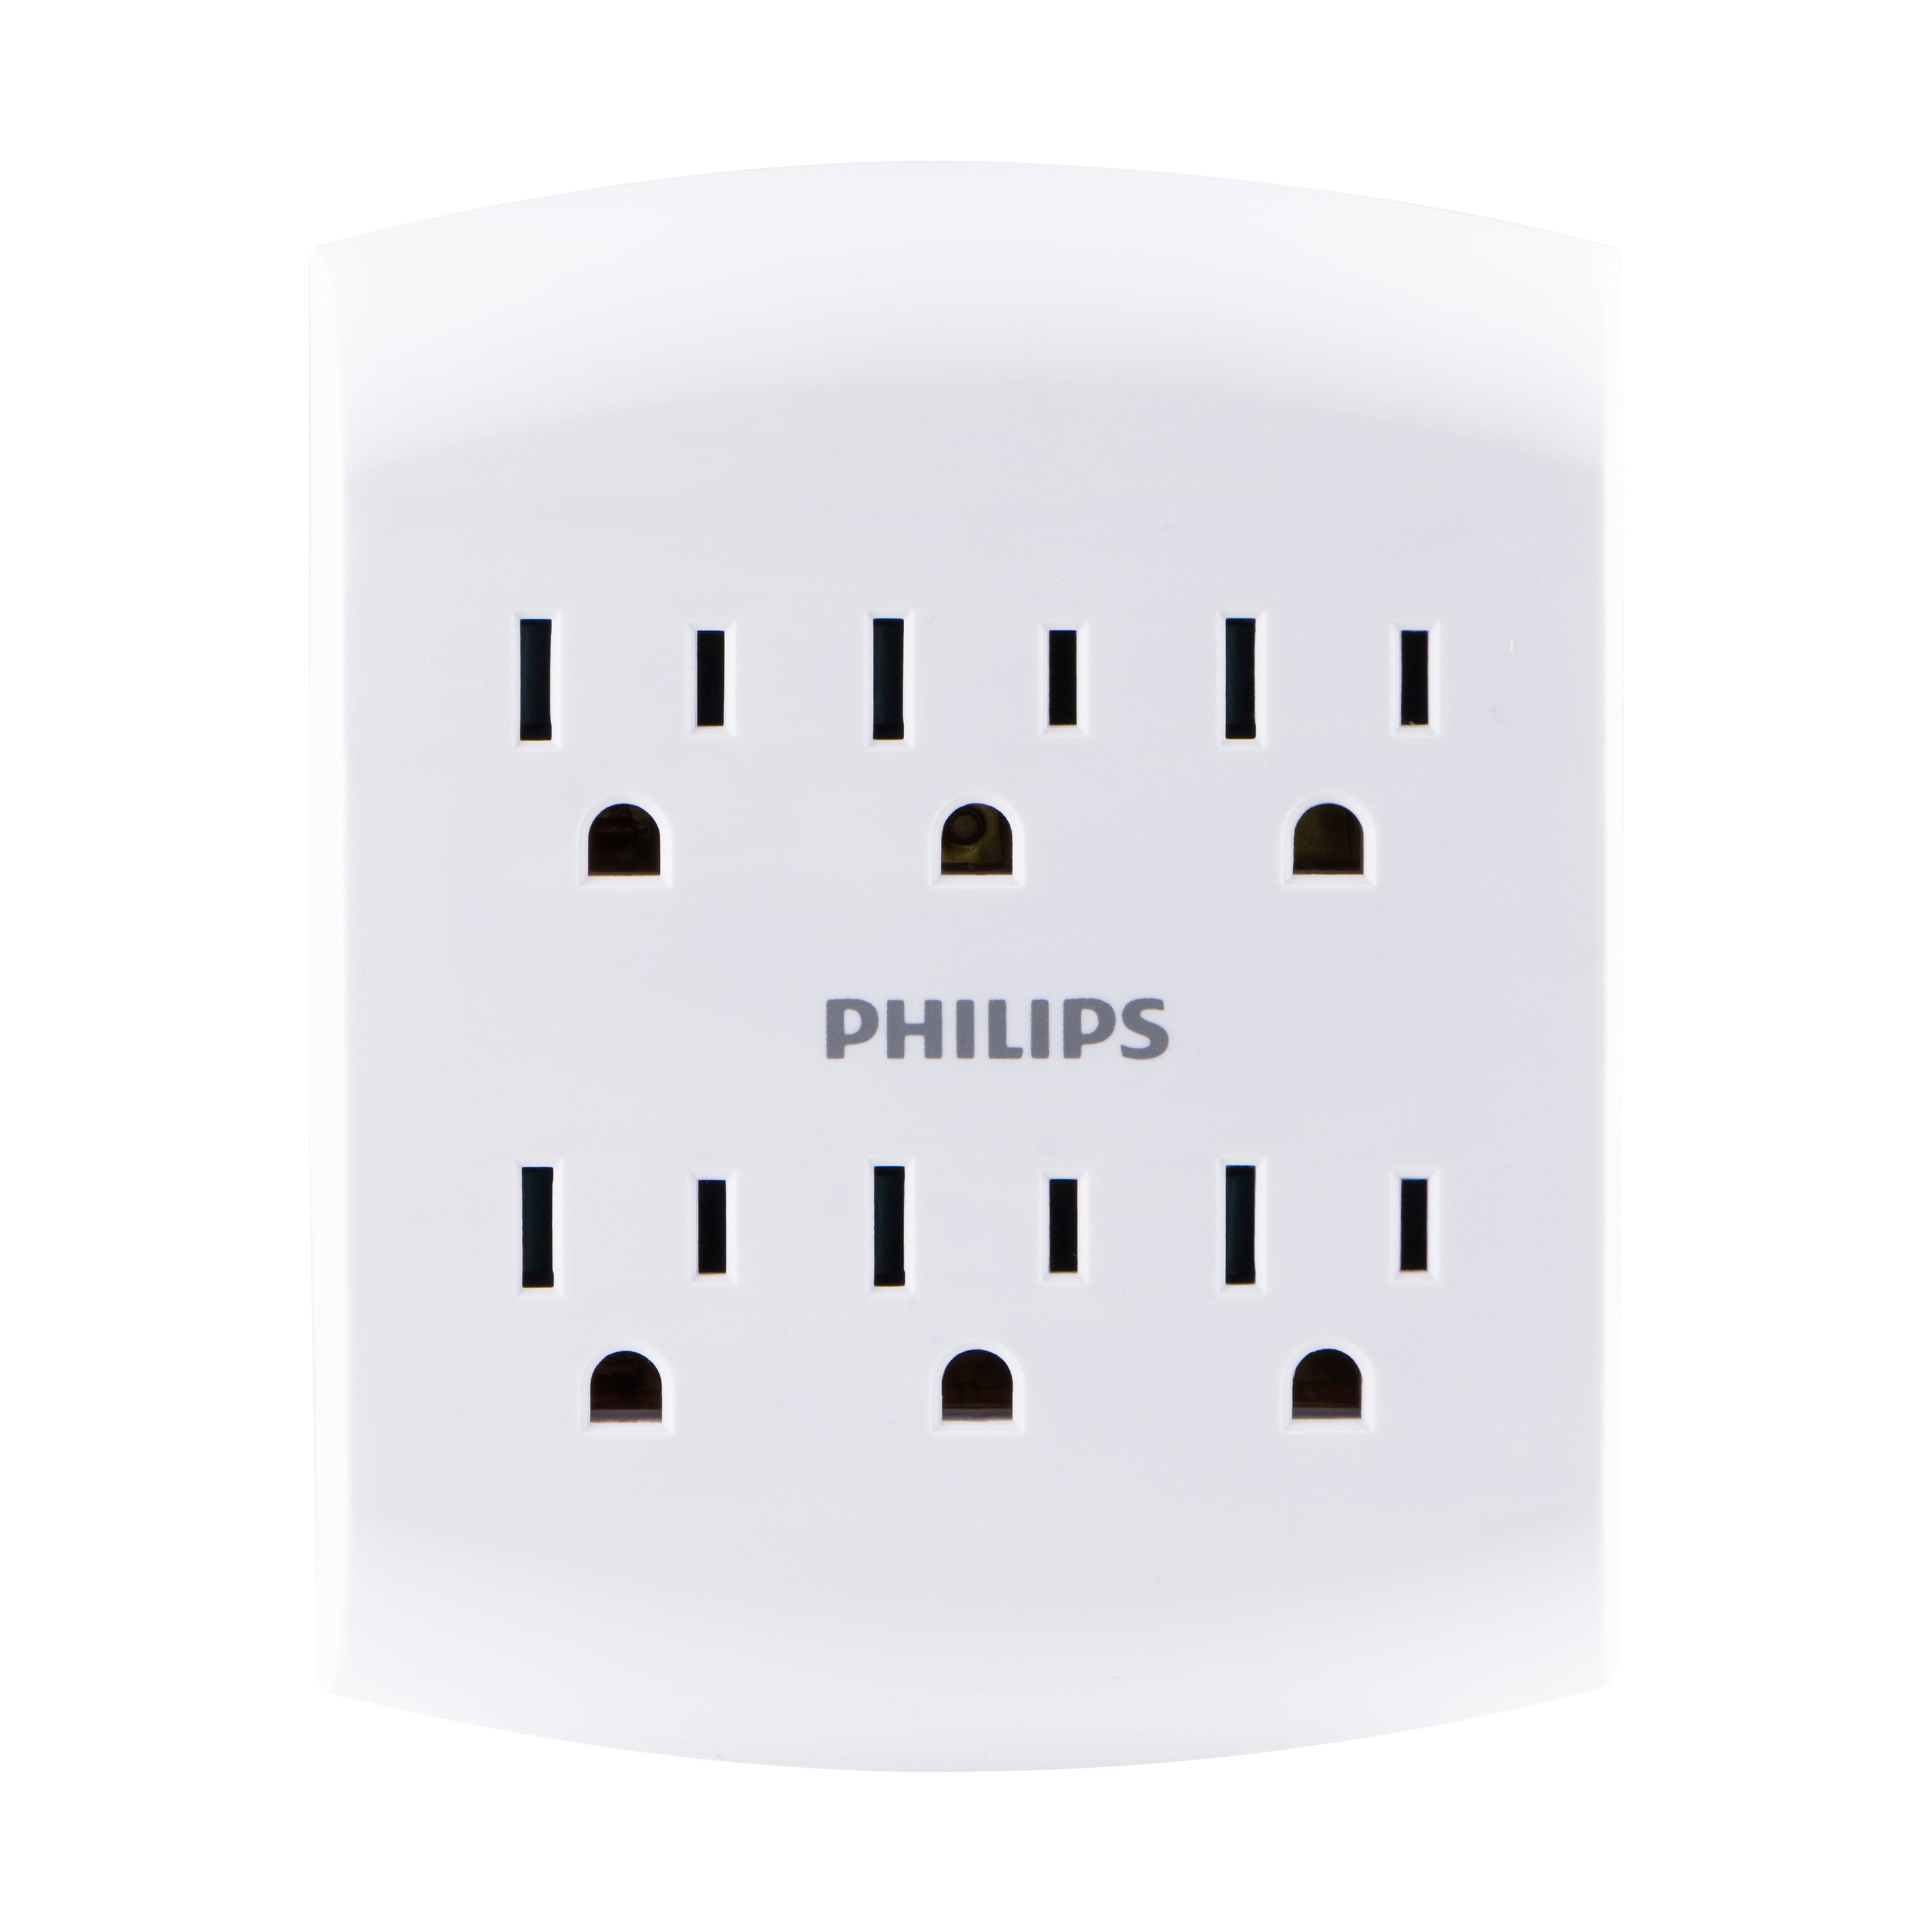 Philips 6 Outlet Outlet Adapter, Wall Tap Power Strip, Tamper Resistant Protected Outlets